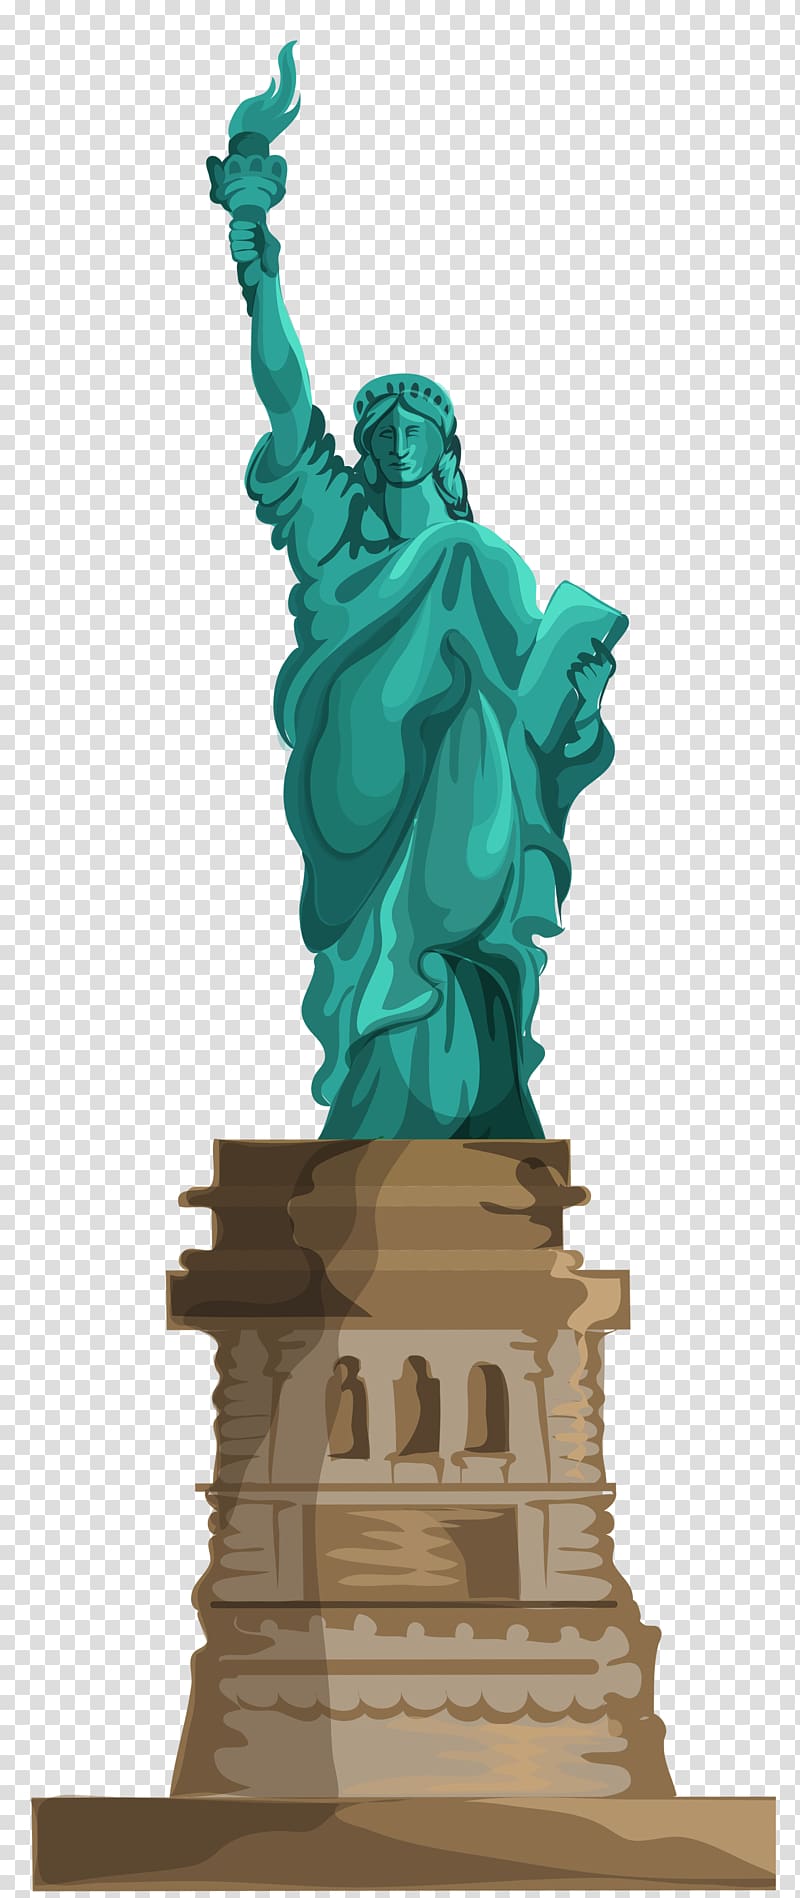 Statue of Liberty, New York , Statue of Liberty Battery Park Ellis Island New York Harbor American Museum of Immigration, Statue of Liberty transparent background PNG clipart